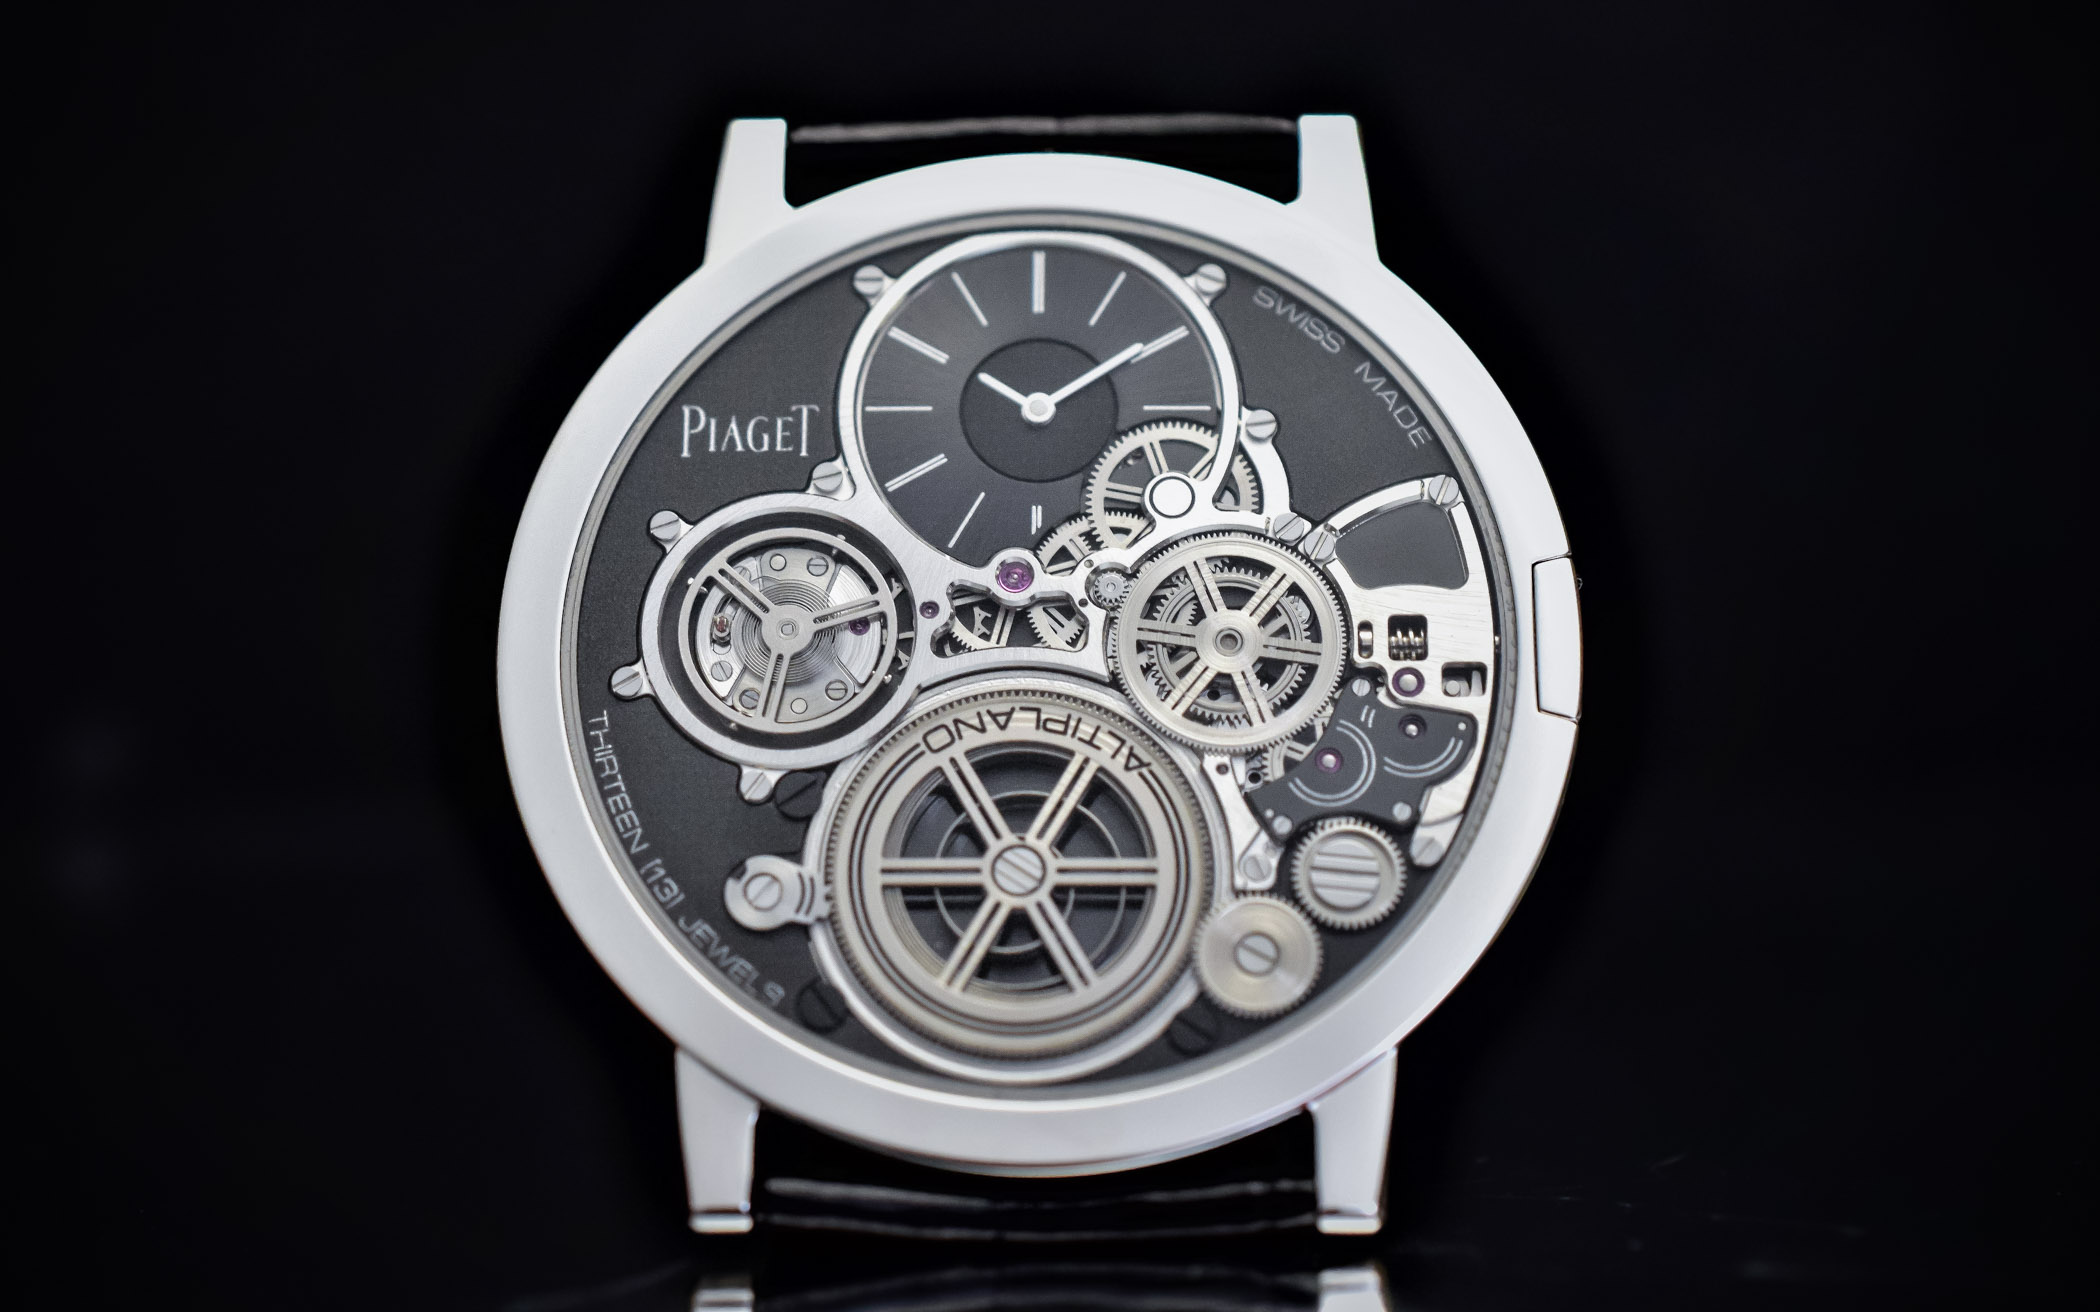 Piaget Altiplano Ultimate Concept - thinnest mechanical watch in the world 2mm